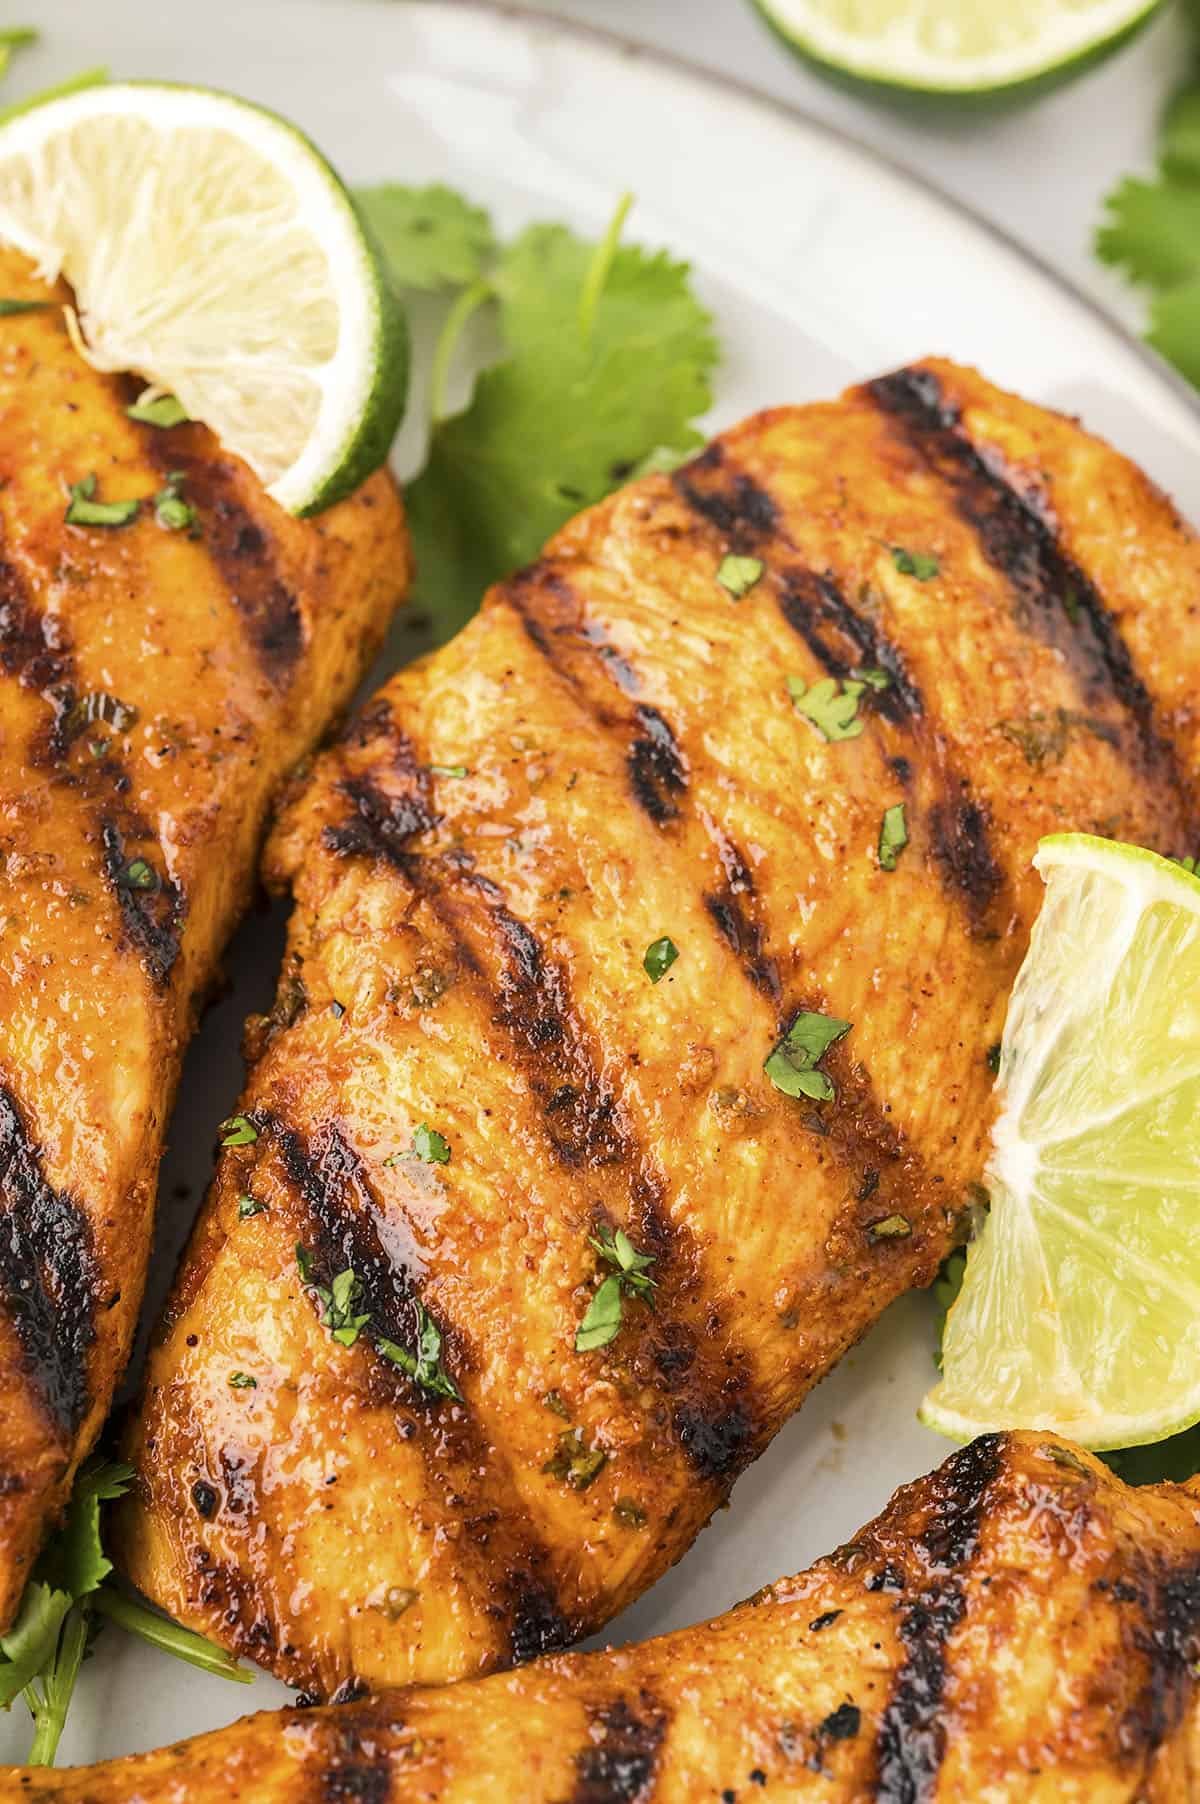 Cilantro lime chicken breasts on plate.